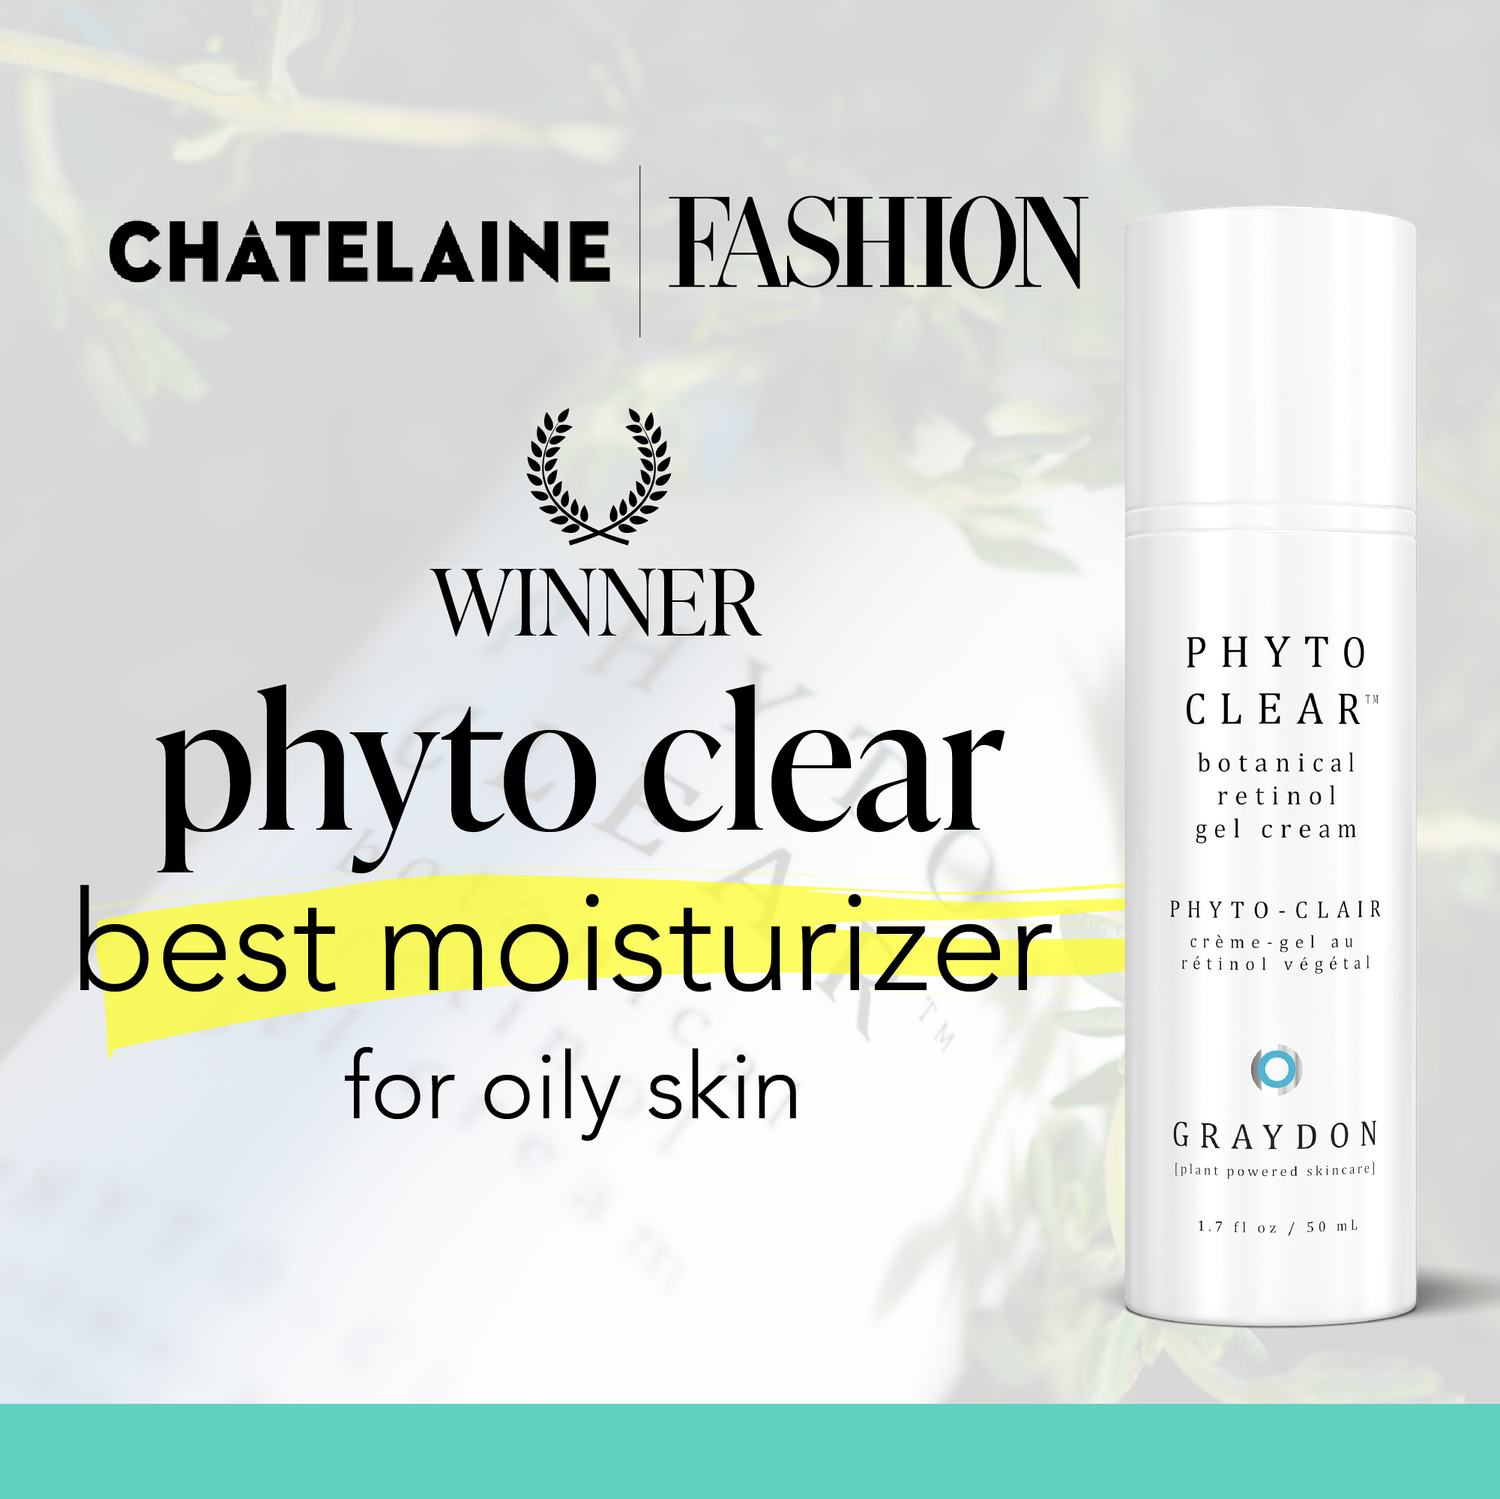 chatelaine fashion award winner is phyto clear for best moisturizer for oily skin